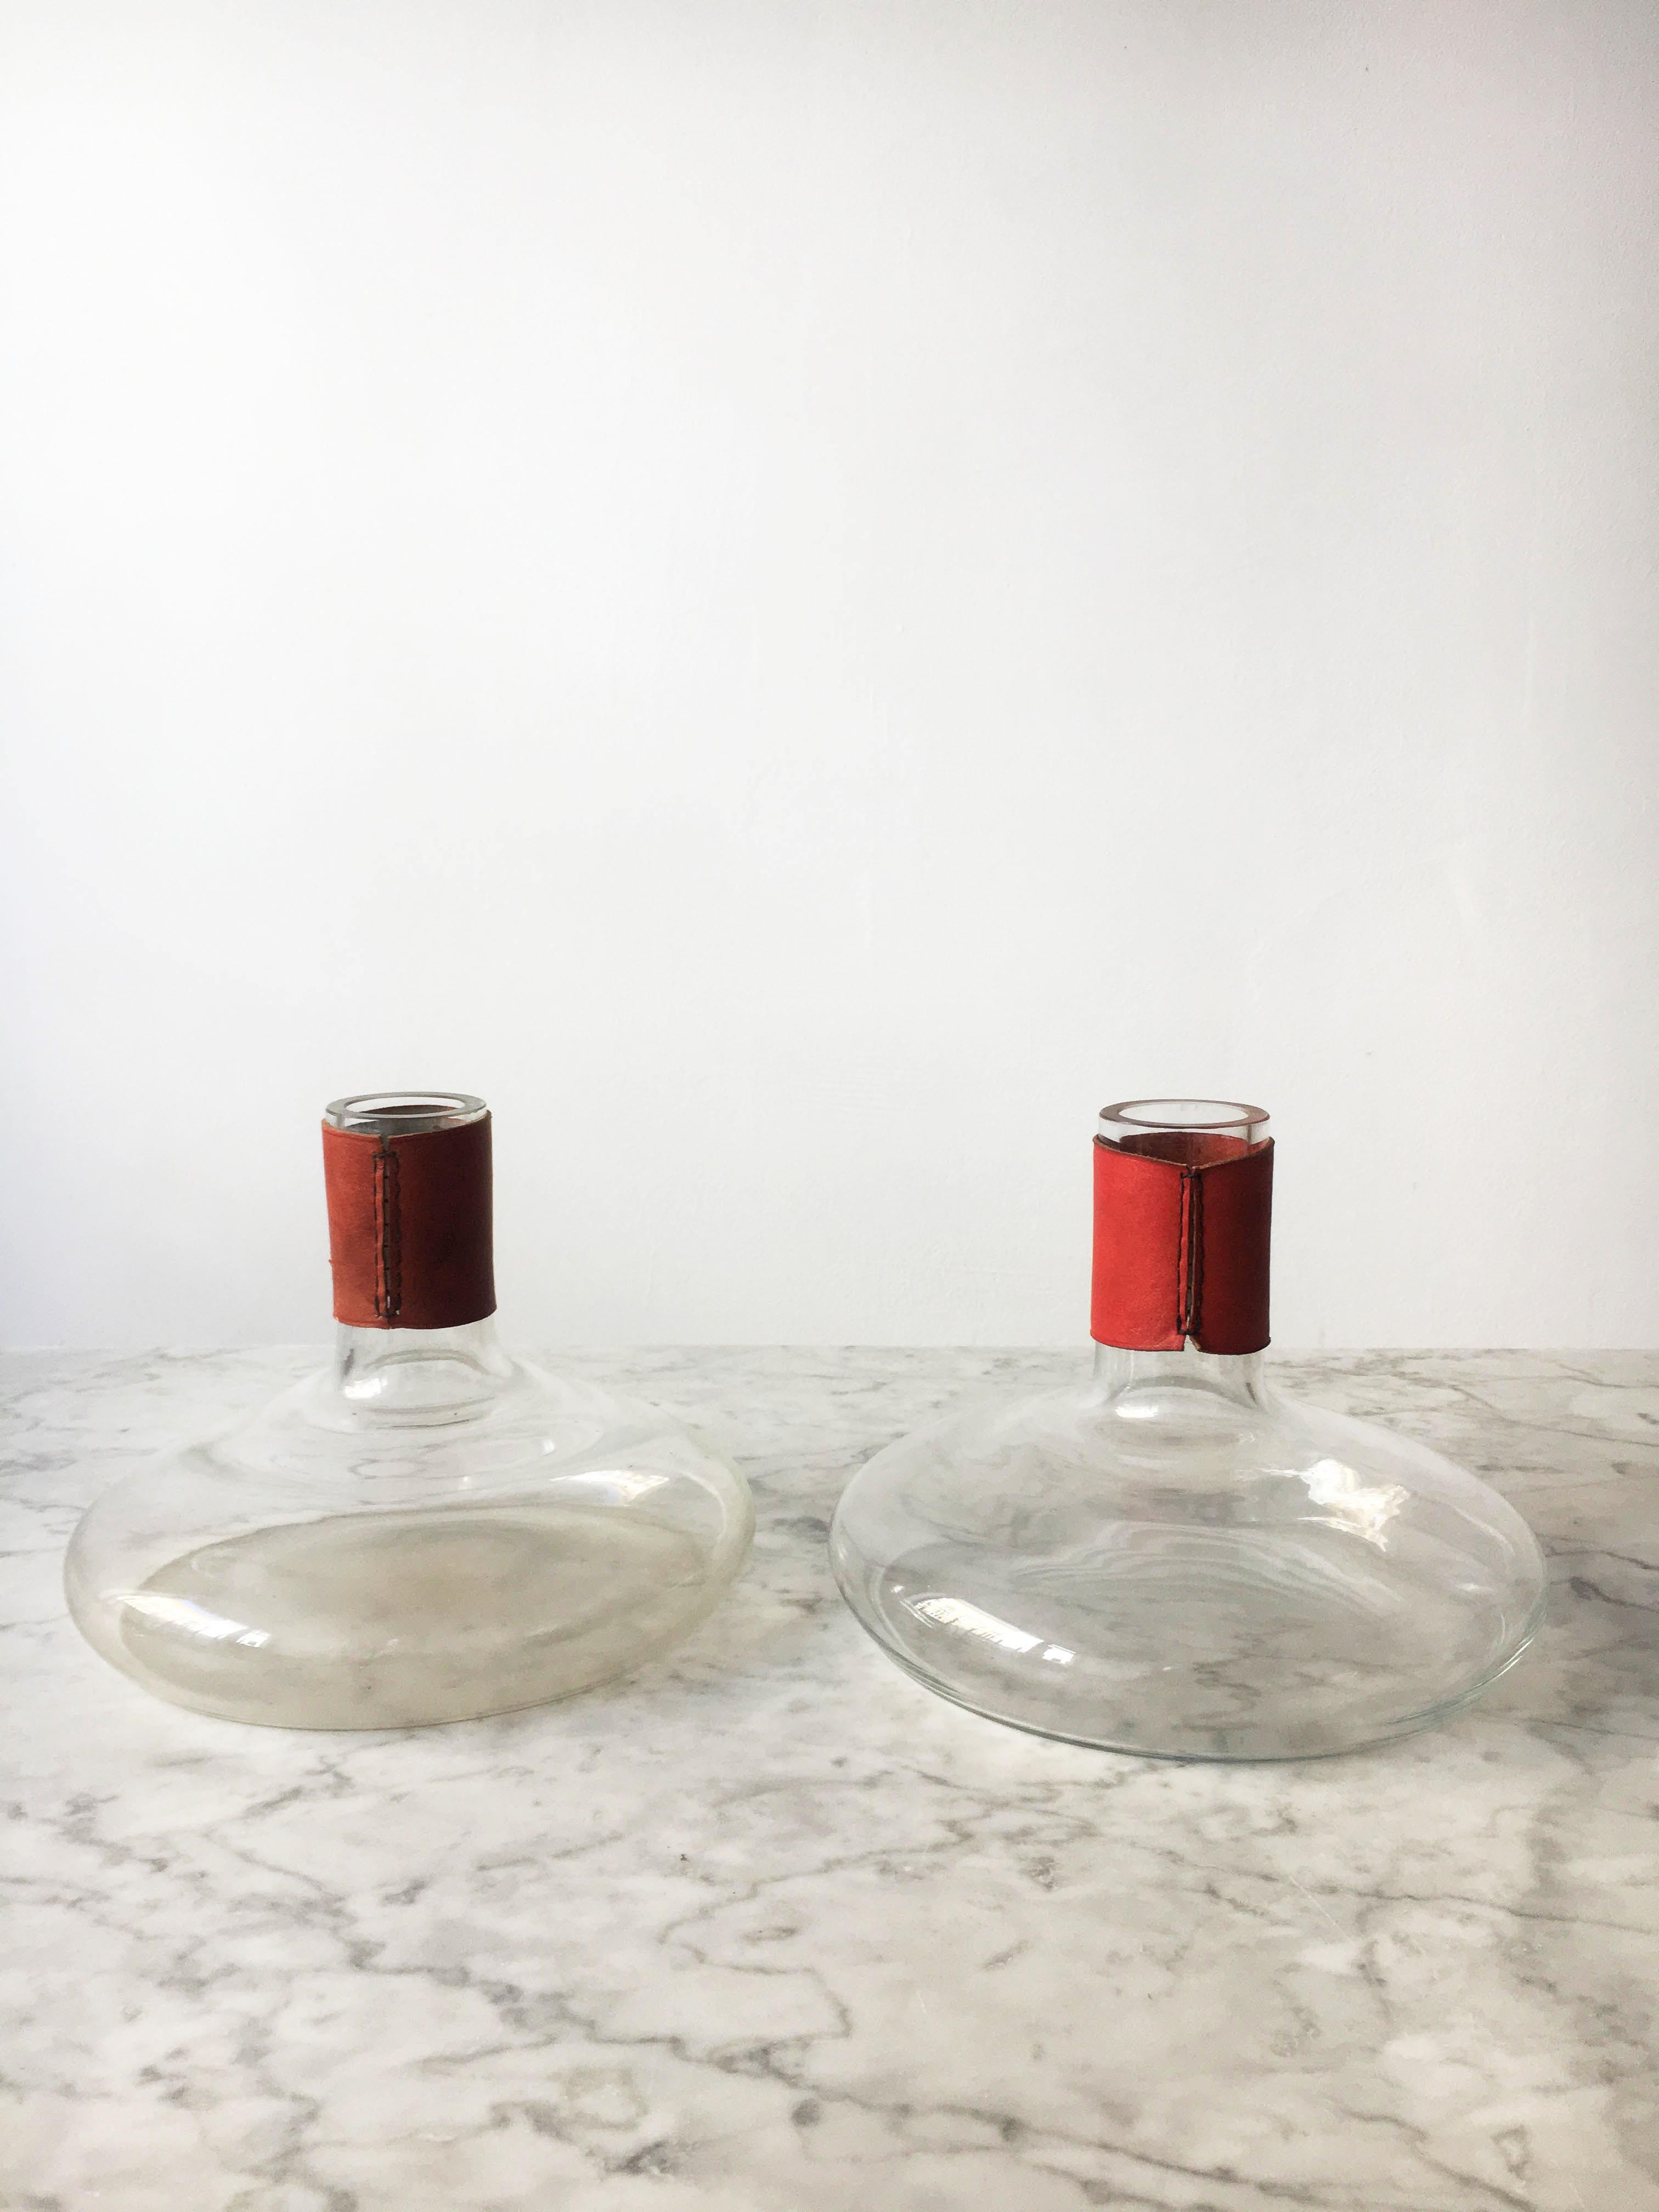 Decanter designed by Carl Auböck, manufactured by Carl Auböck Werkstätte, Vienna, 1950s. An original pair, lovely vintage condition with just the right amount of gently aged patina.